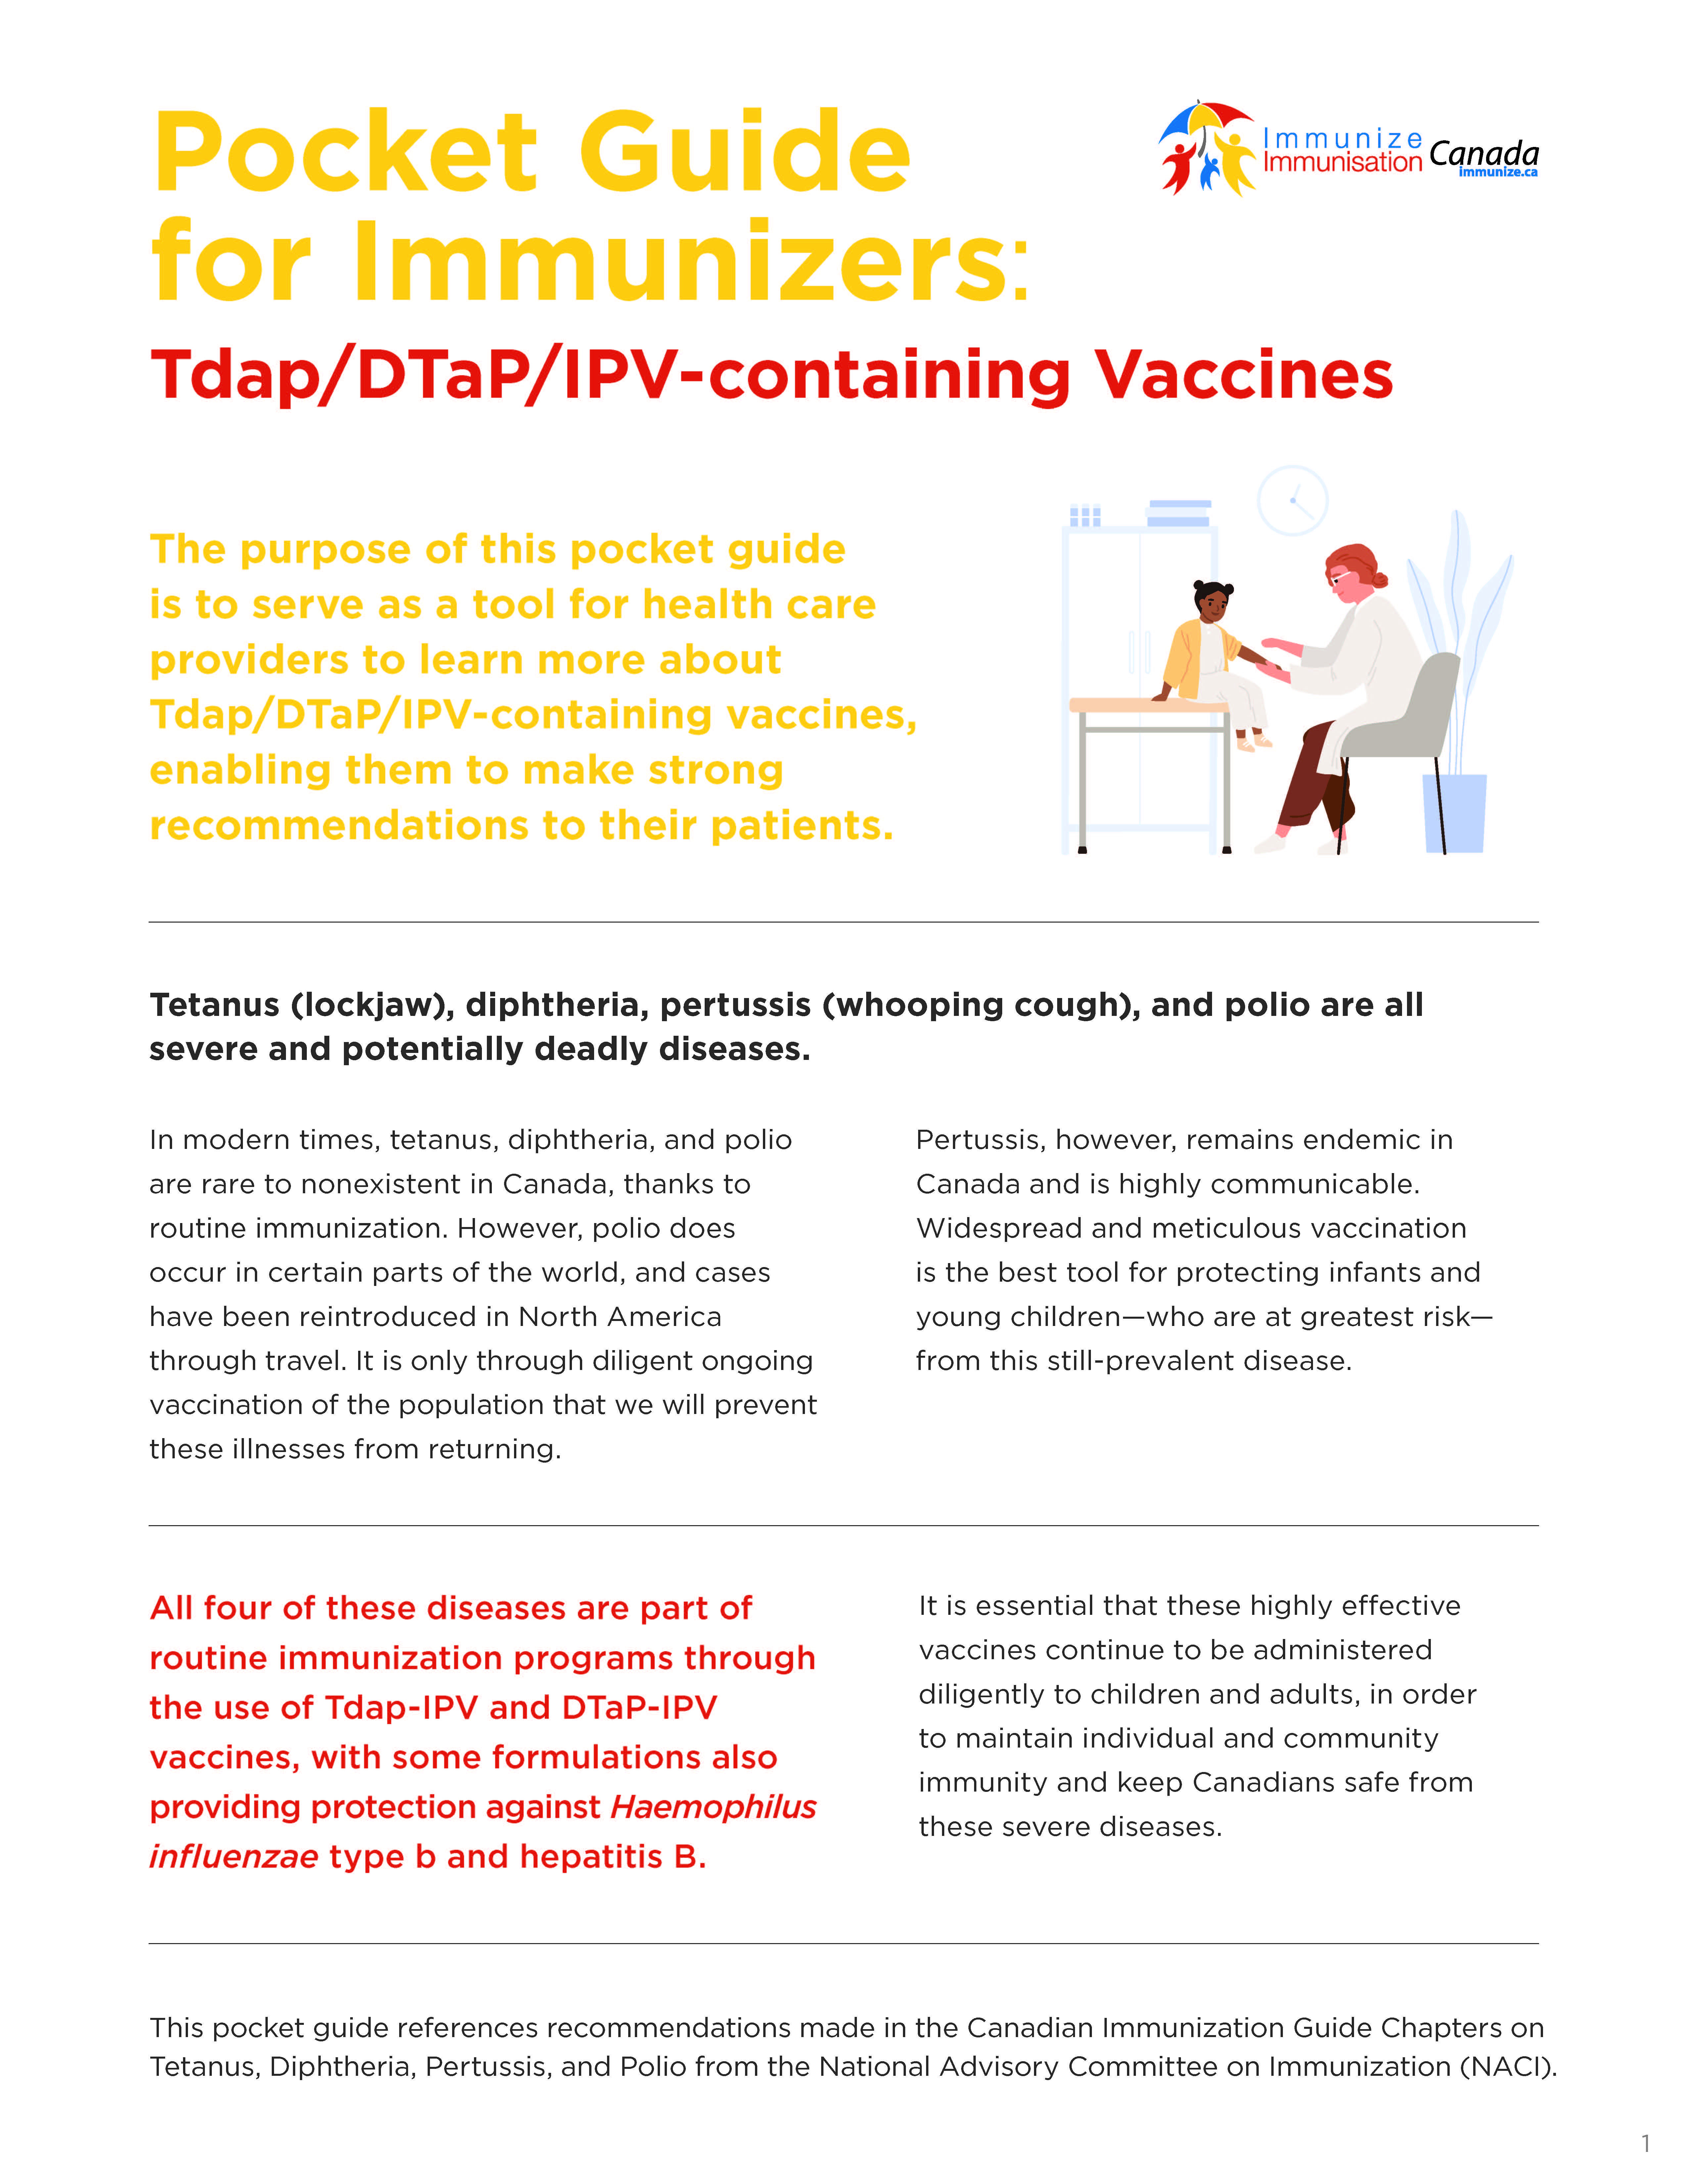 Pocket Guide for Immunizers: Tdap/DTaP/IPV-containing Vaccines